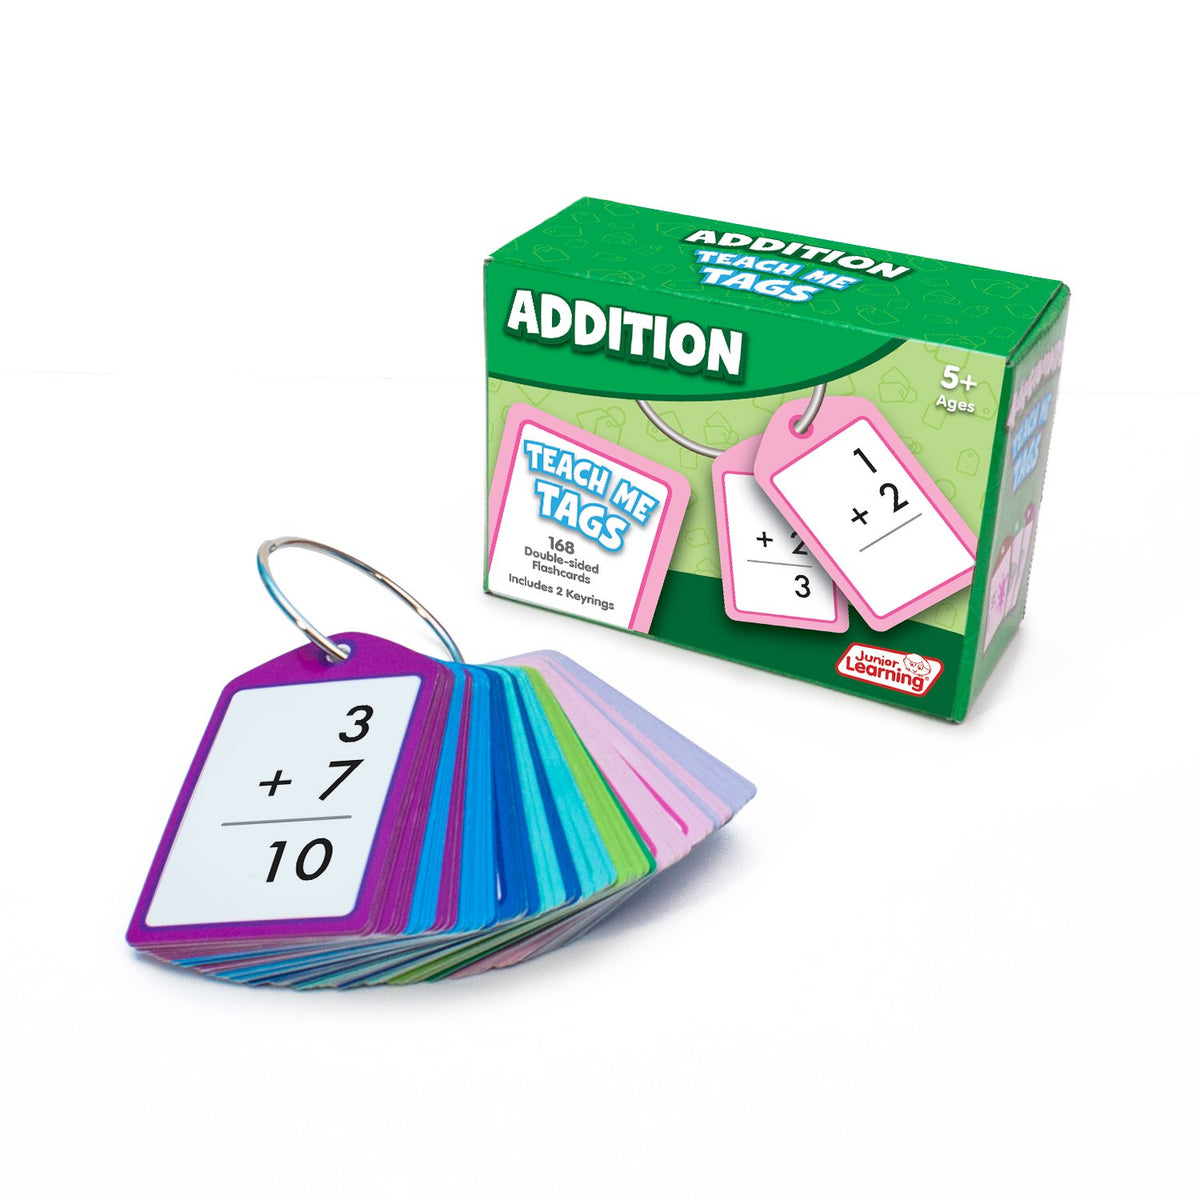 Junior Learning JL630 Addition Teach Me Tags box and content